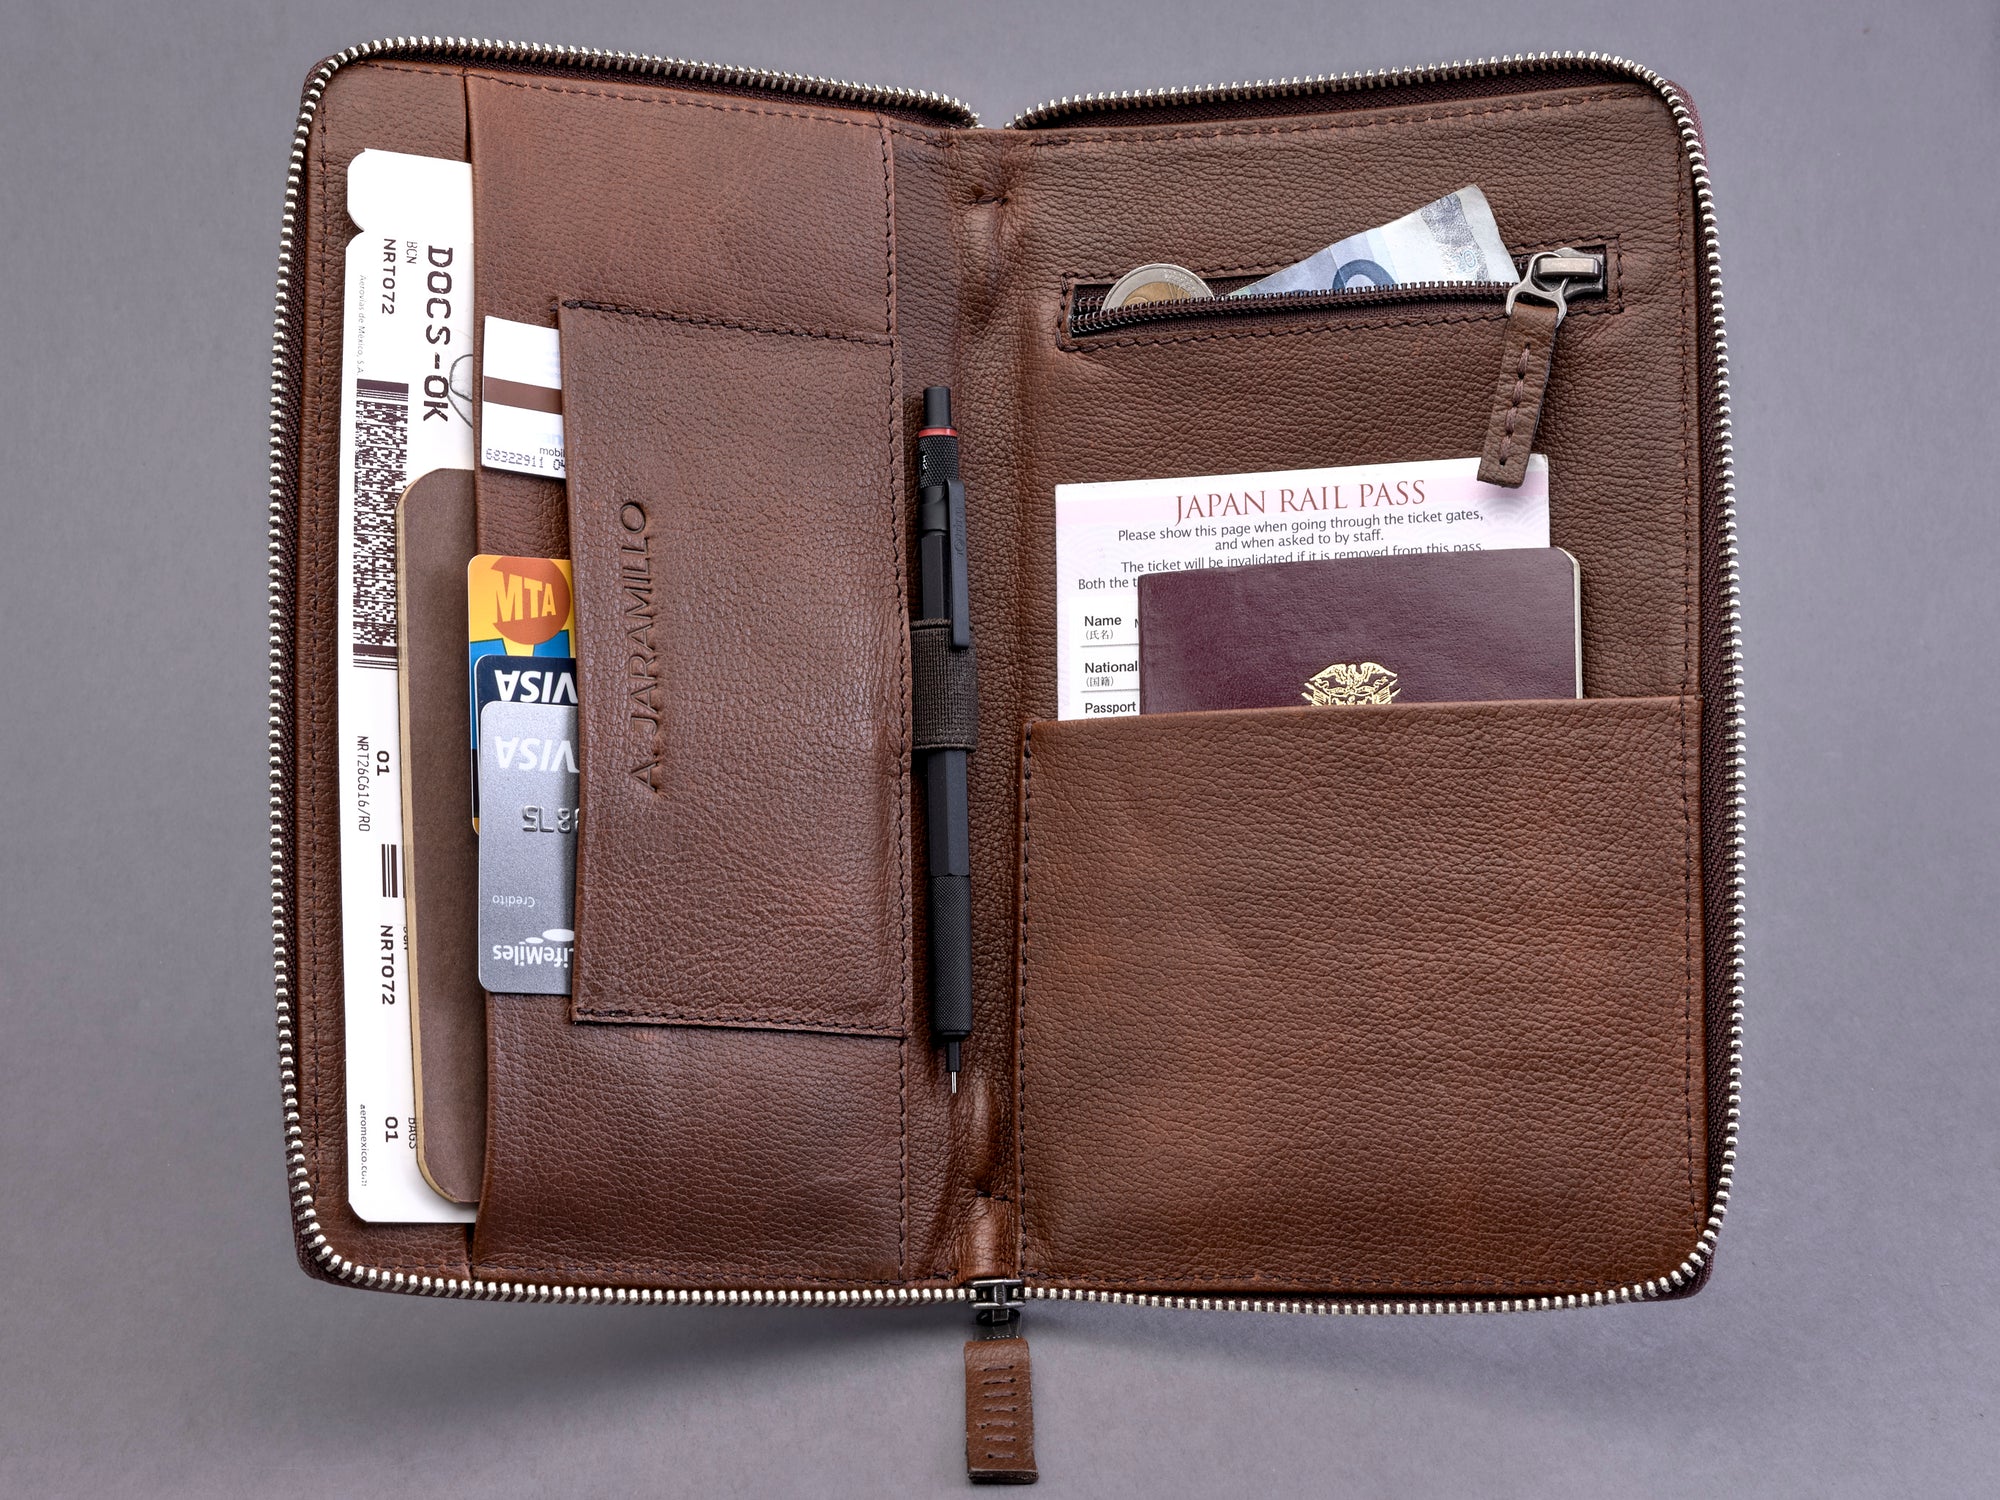 Money, cards and documents. Brown Passport Holder for travelers, document organizer, travel journal by Capra Leather